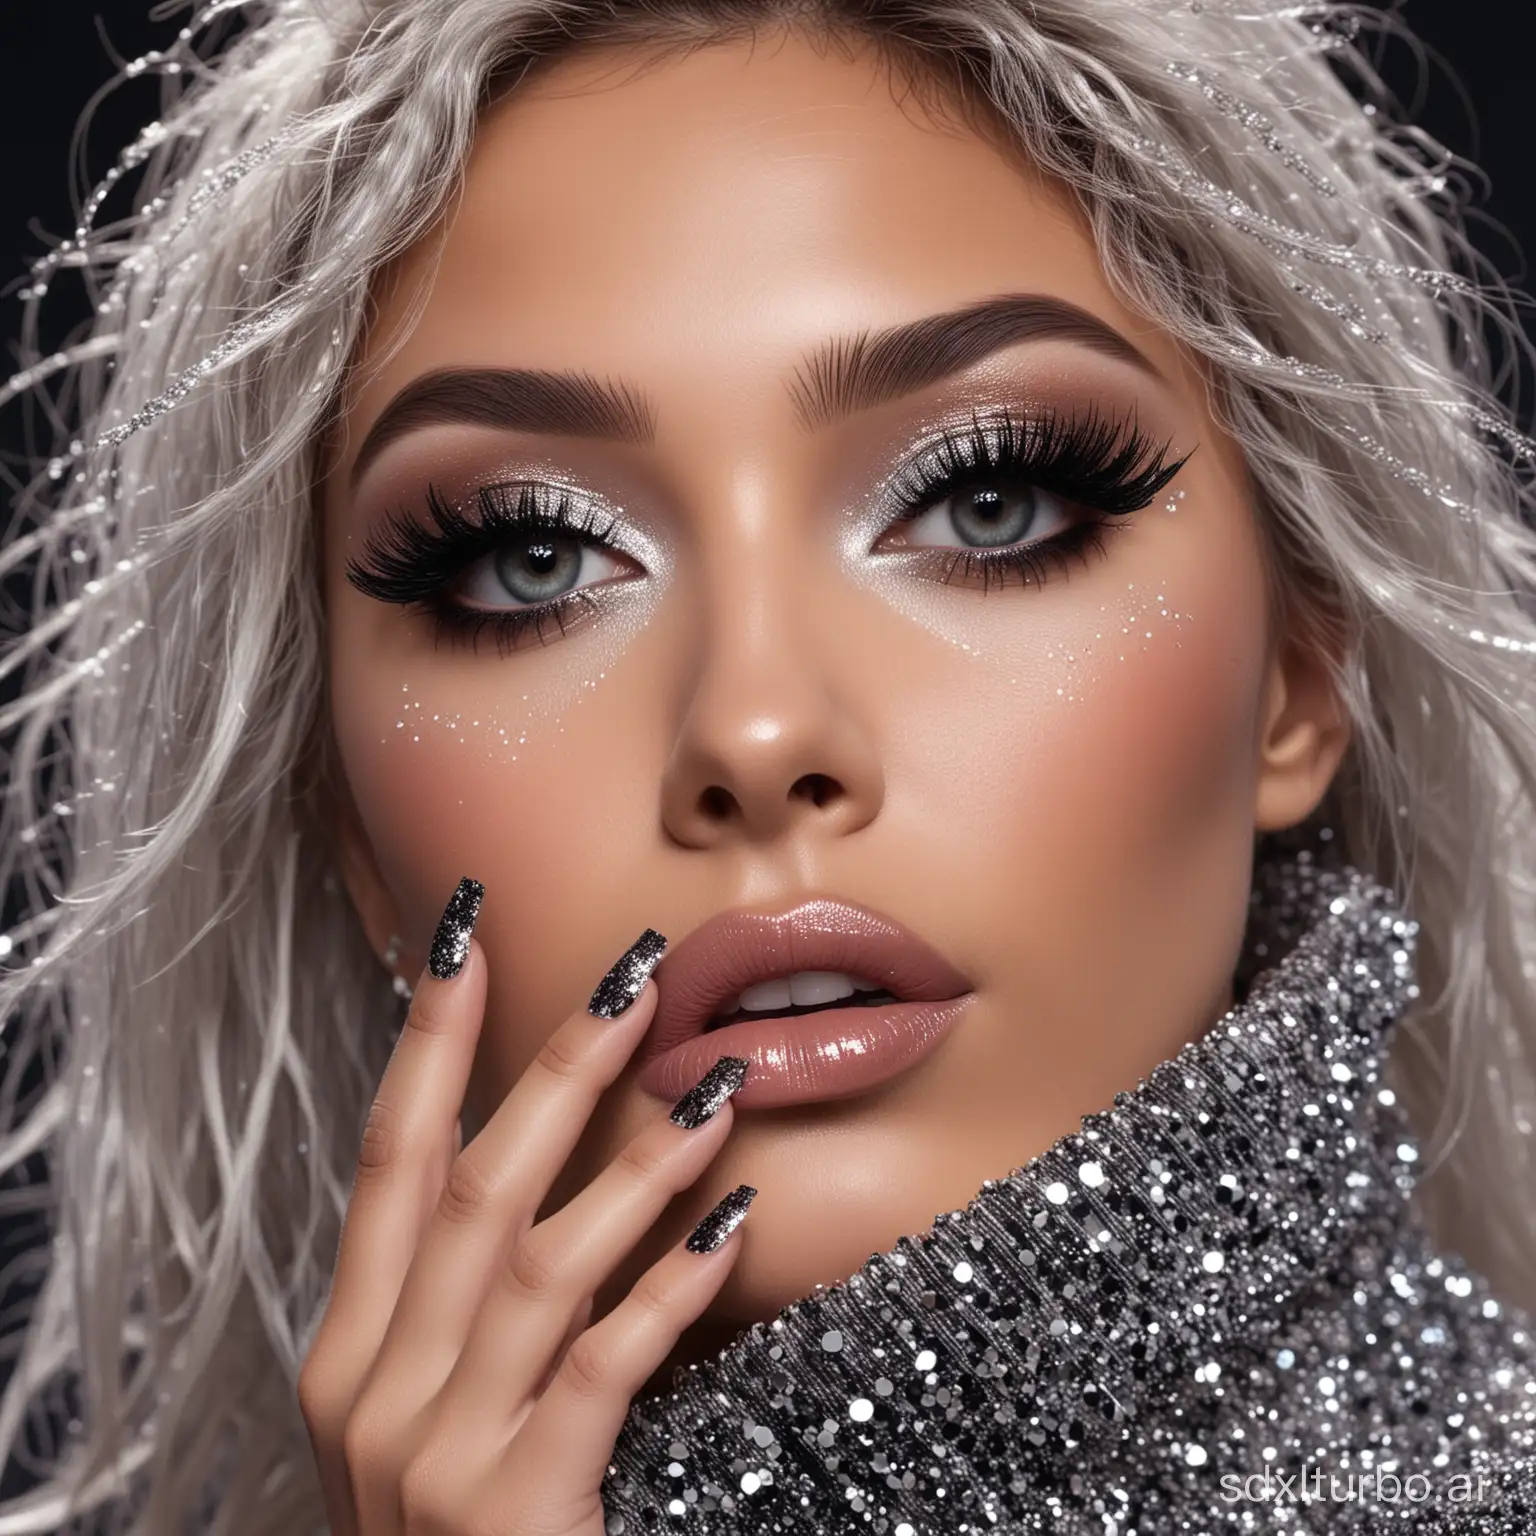 Extravagant-Model-with-Glittering-Makeup-and-Dreamy-Aesthetic